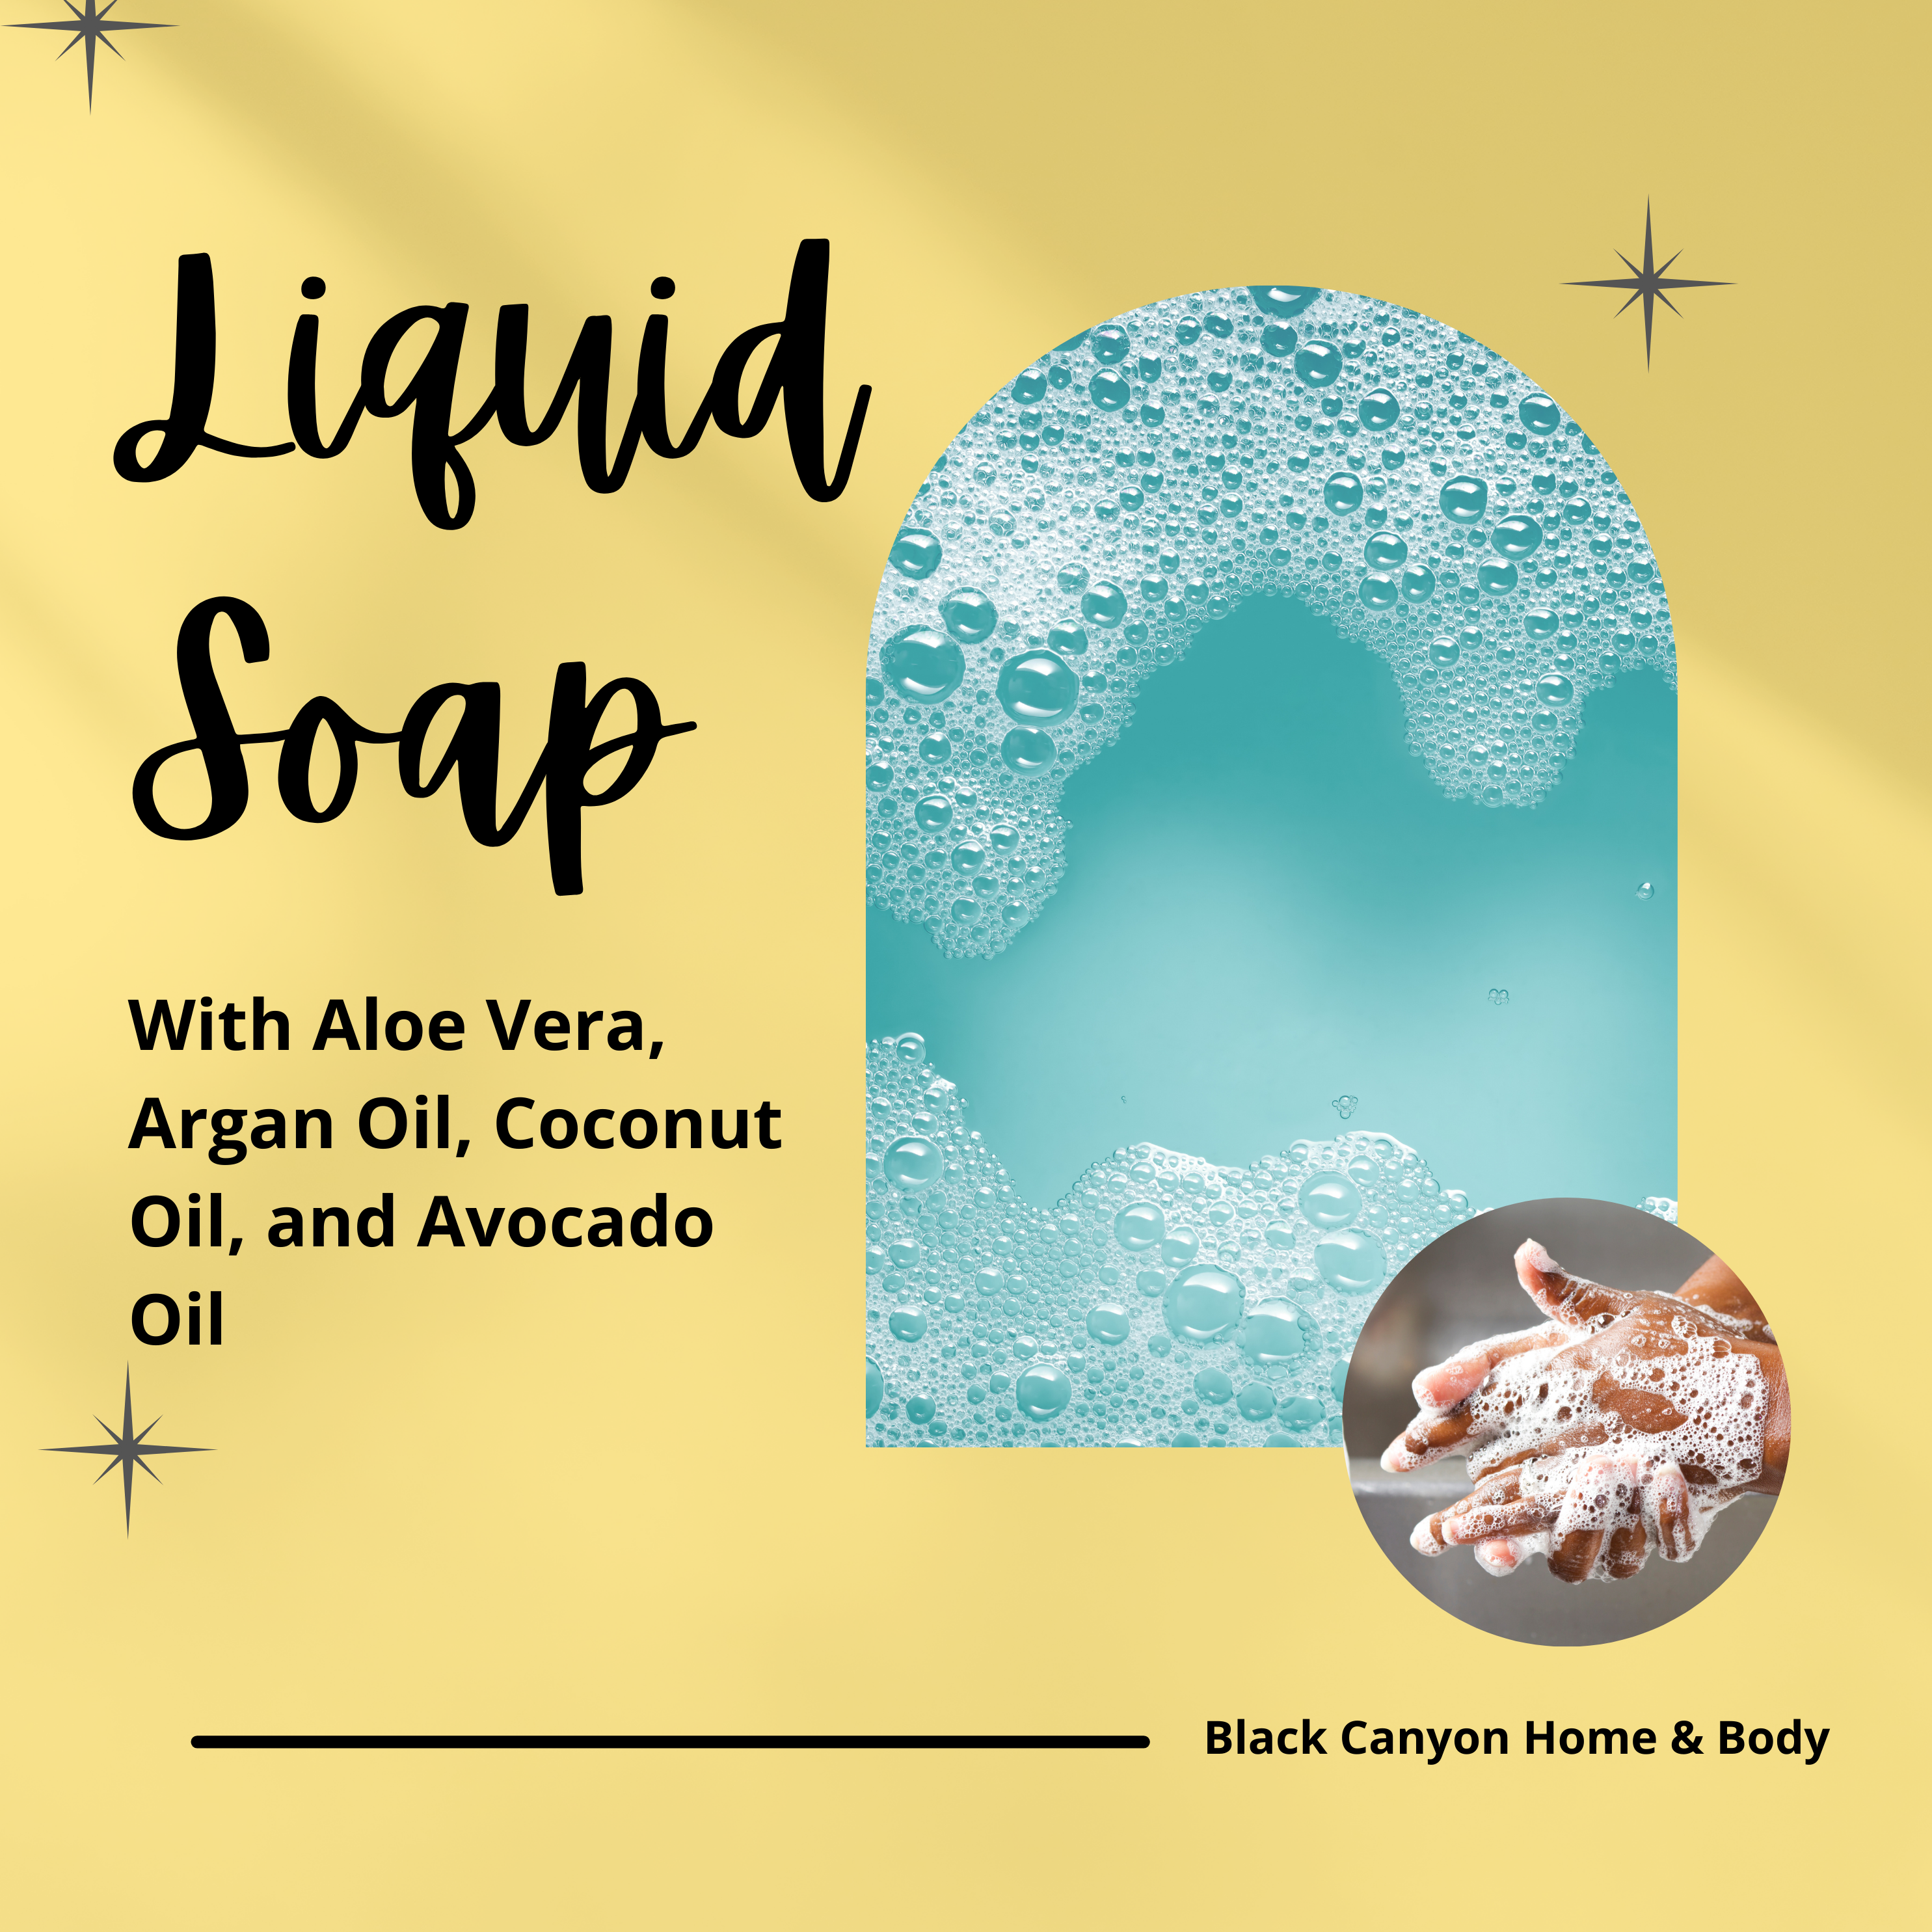 Black Canyon Amber Lime Agave Scented Liquid Hand Soap